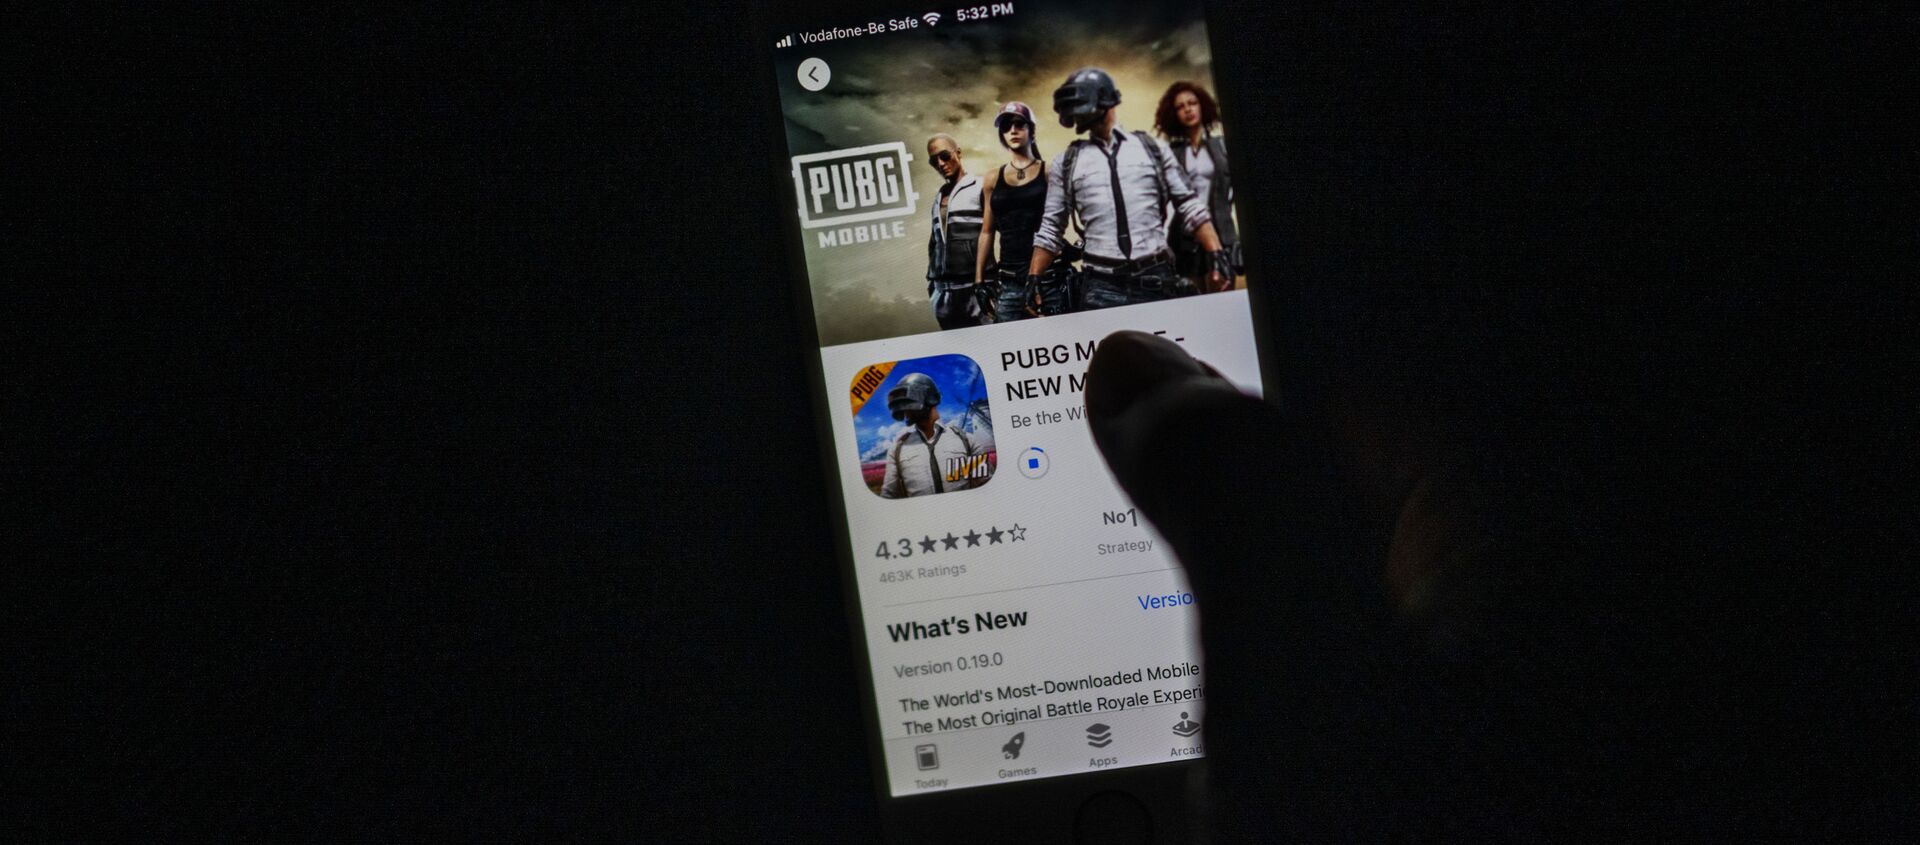 A man looks at the PUBG Mobile game, owned by Chinese internet giant Tencent, in the App Store on an Apple iPhone in New Delhi on September 2, 2020 - Sputnik International, 1920, 03.09.2020